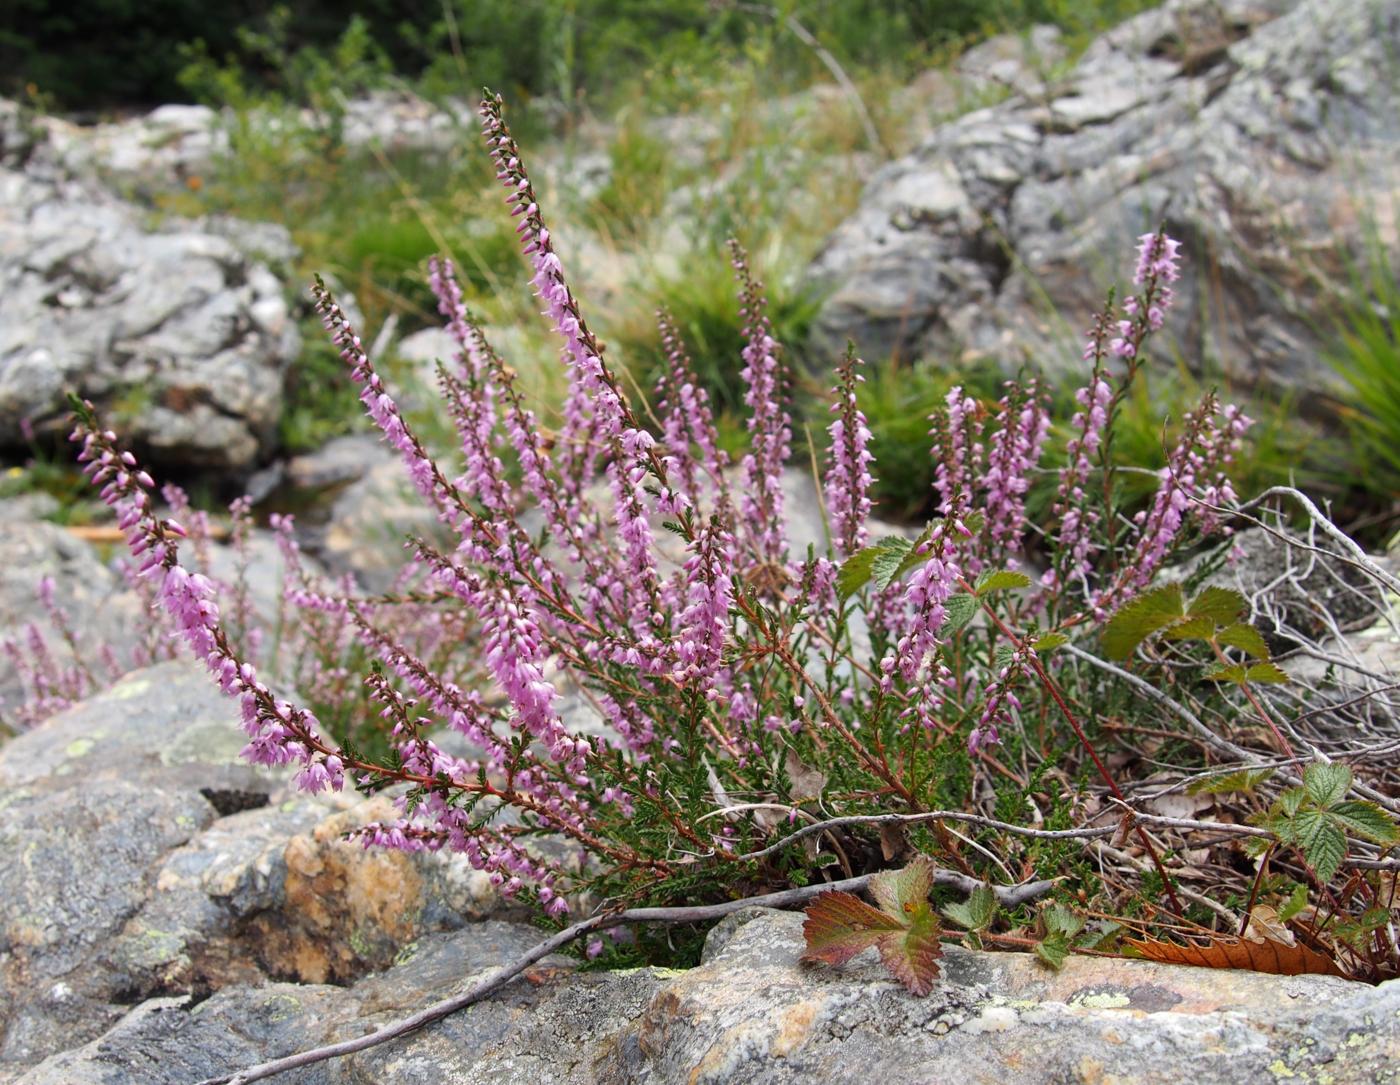 Heather, Ling plant